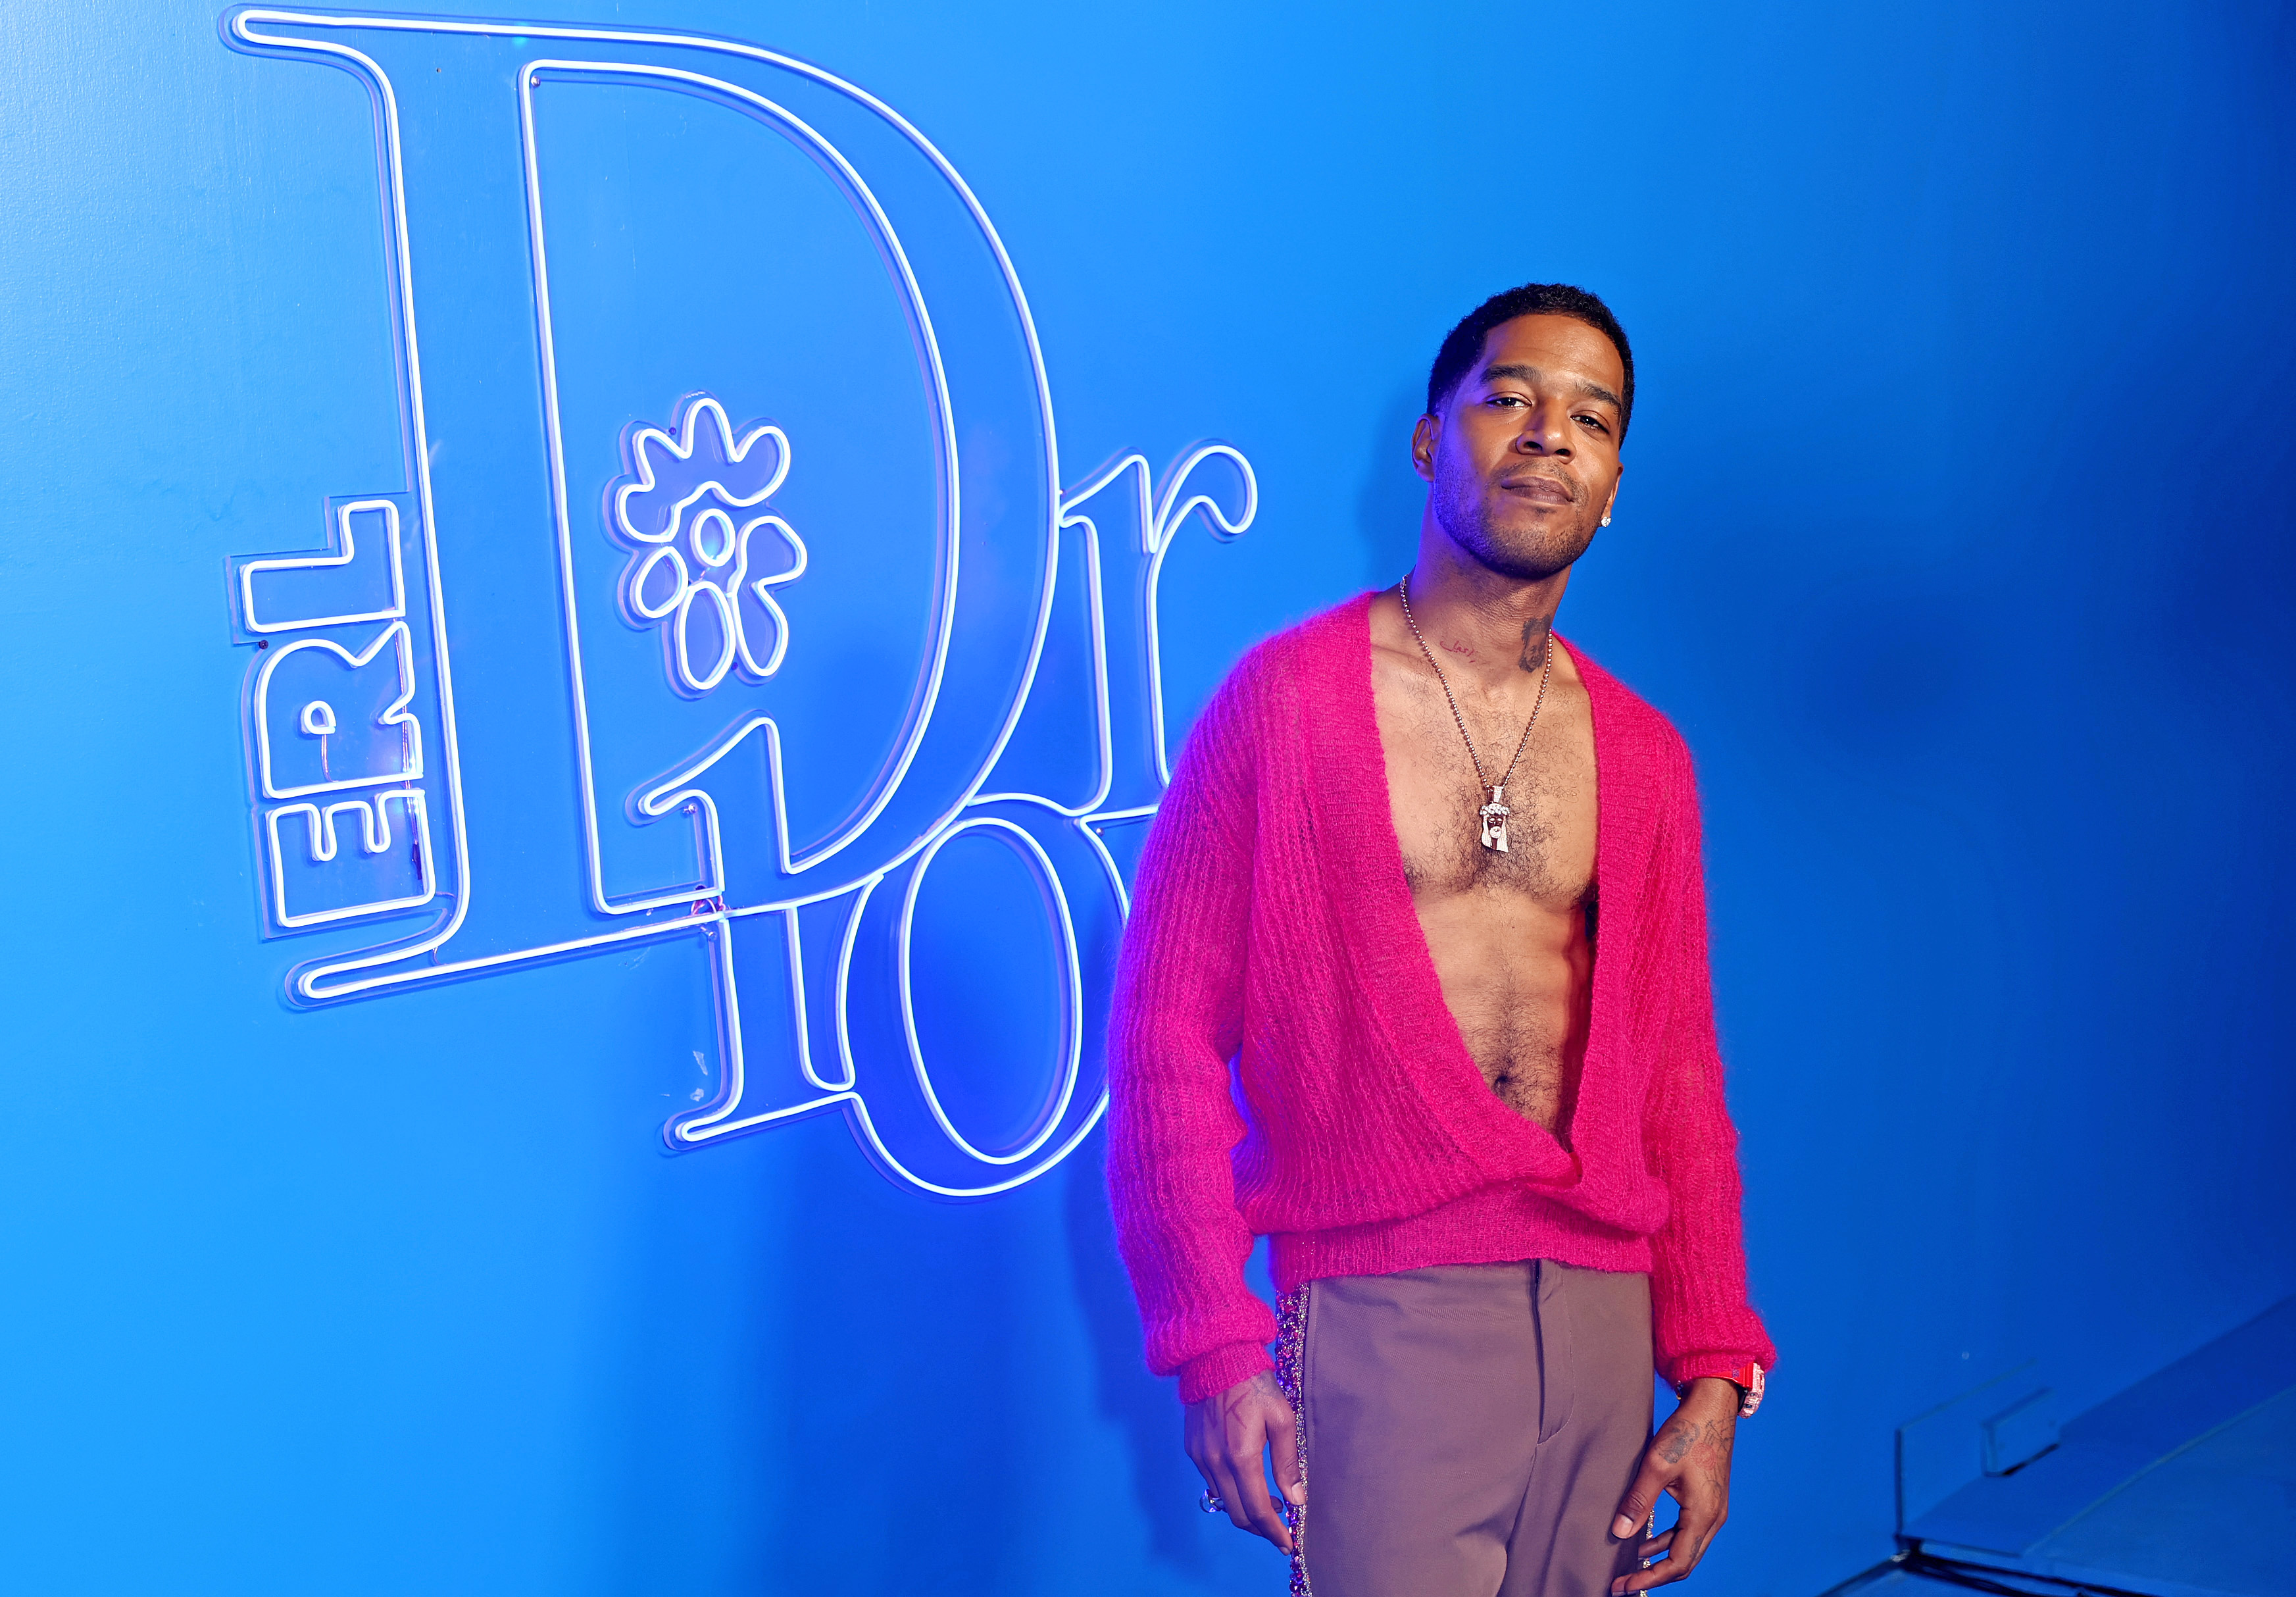 Kid Cudi Announces Dates For “To The Moon” Tour With Don Toliver